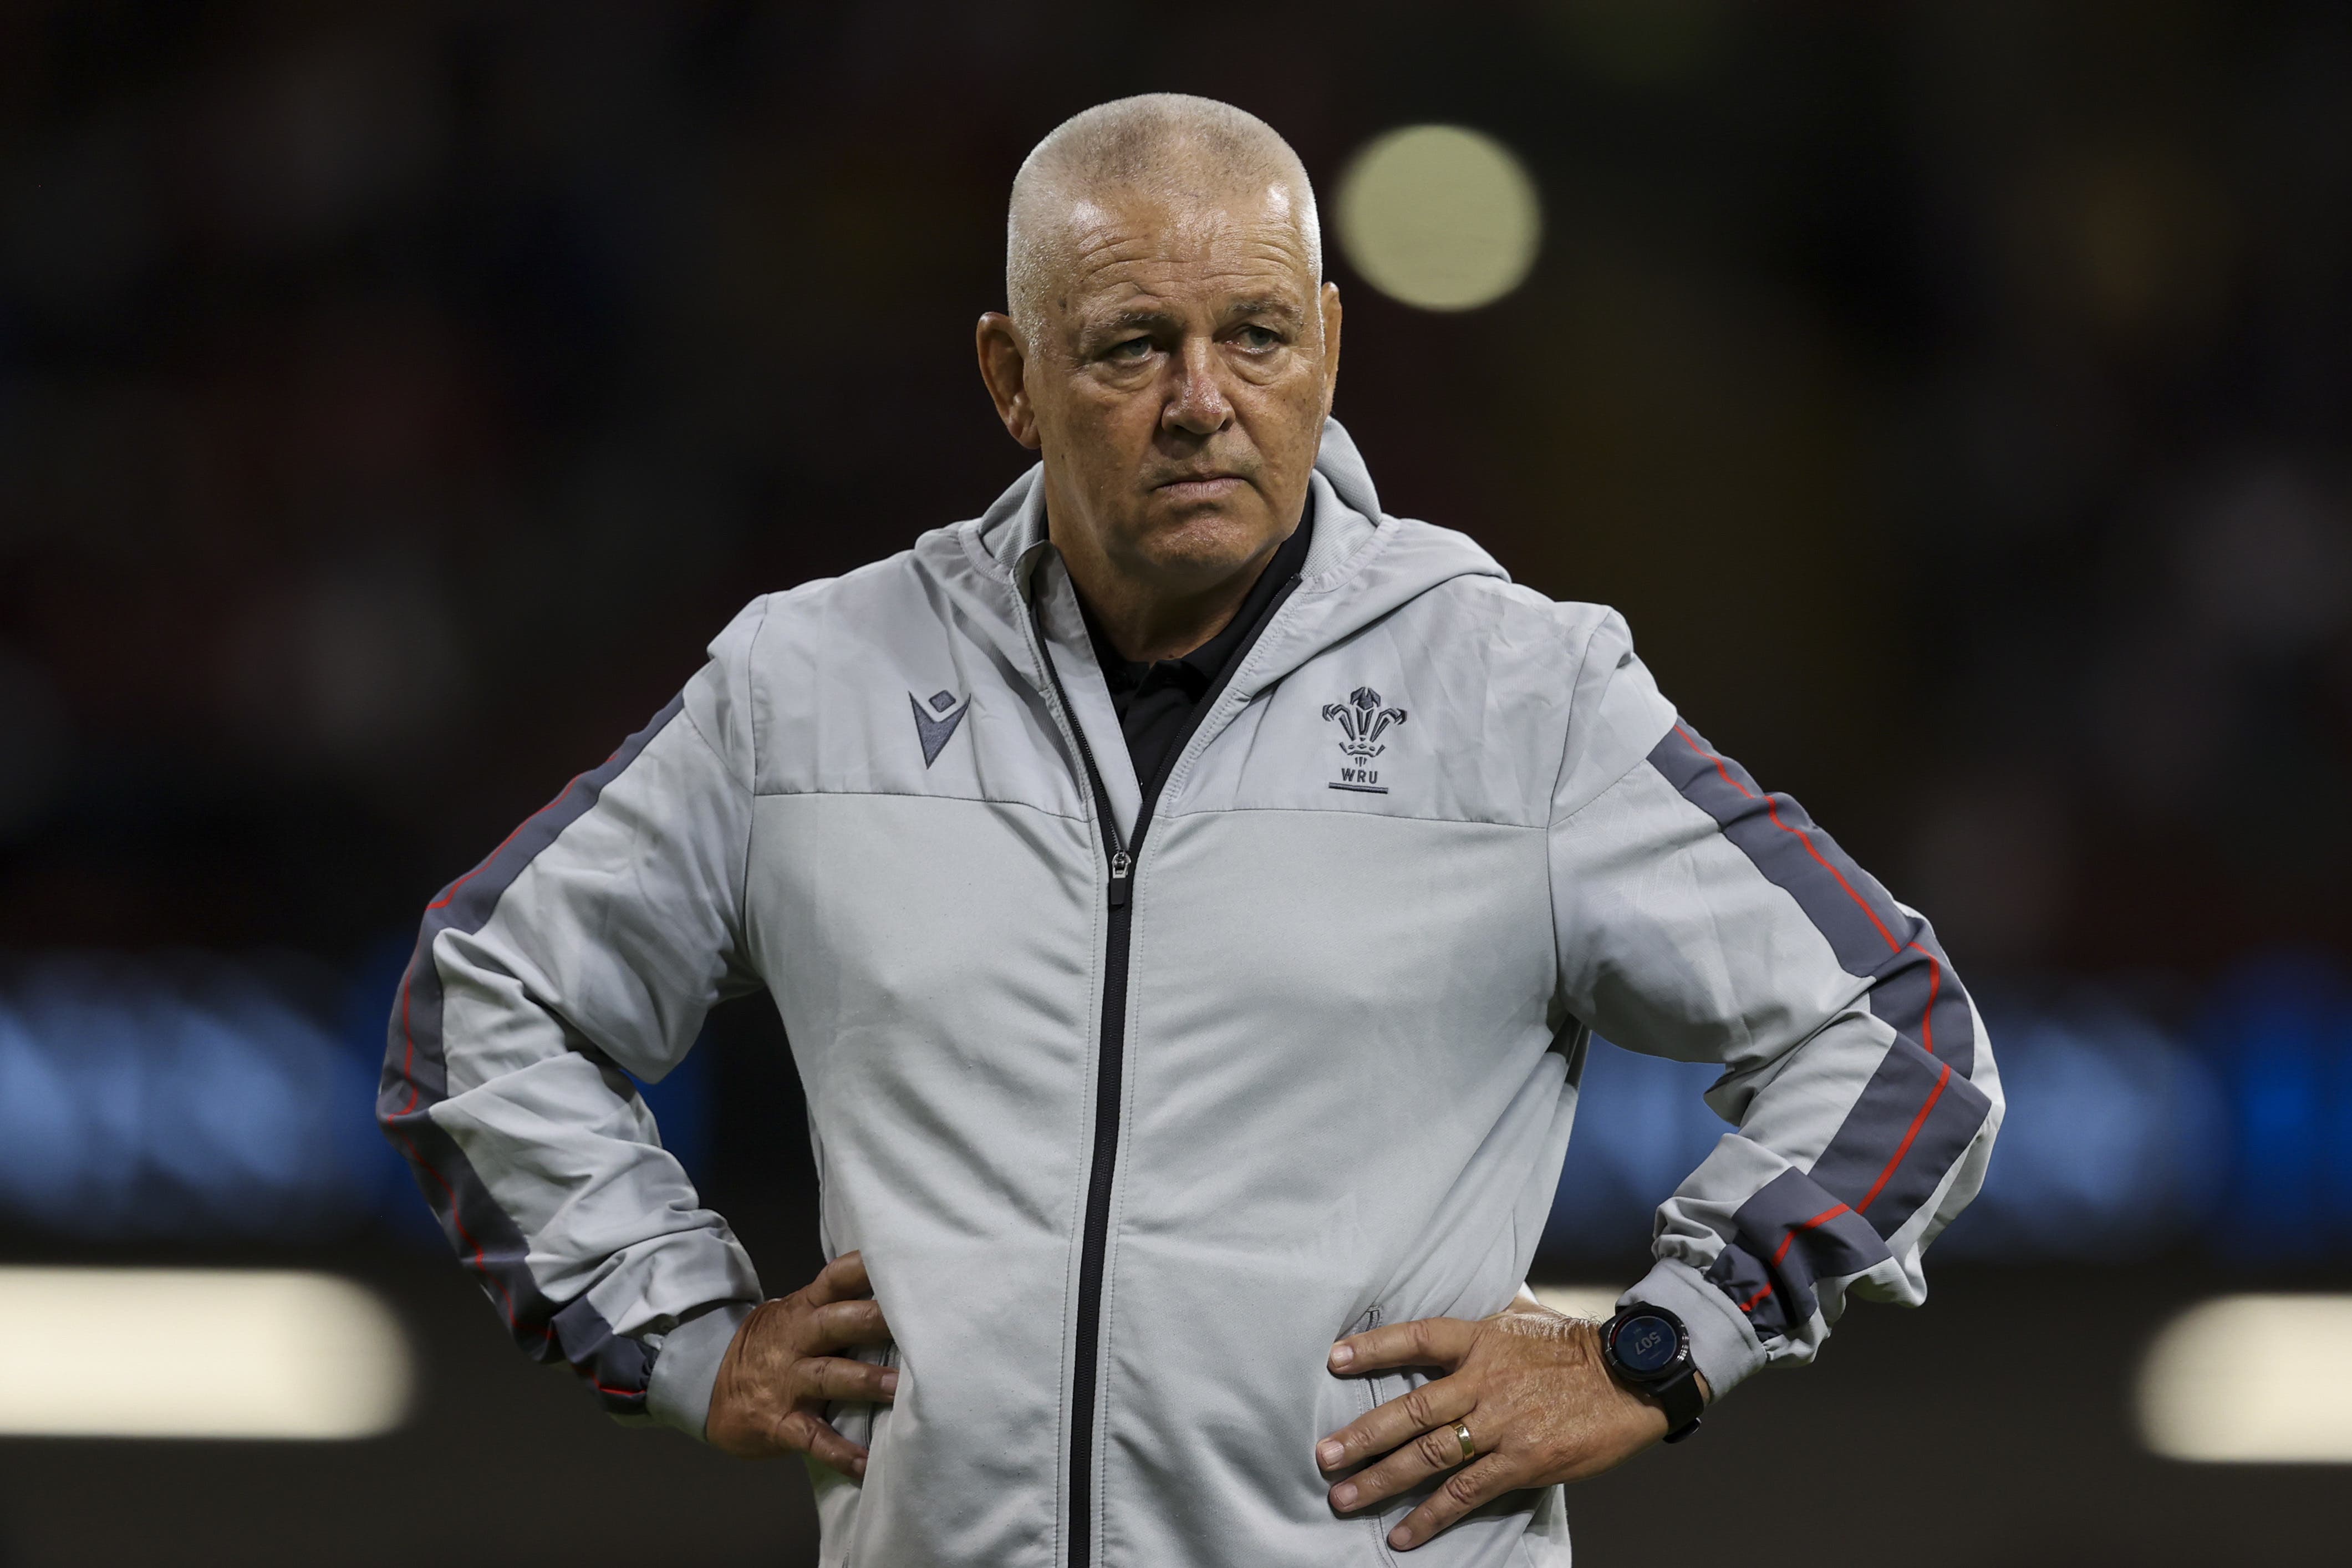 Warren Gatland, whose brand of winning rugby wasn’t deemed exciting enough, has returned but can’t provide an immediate fix